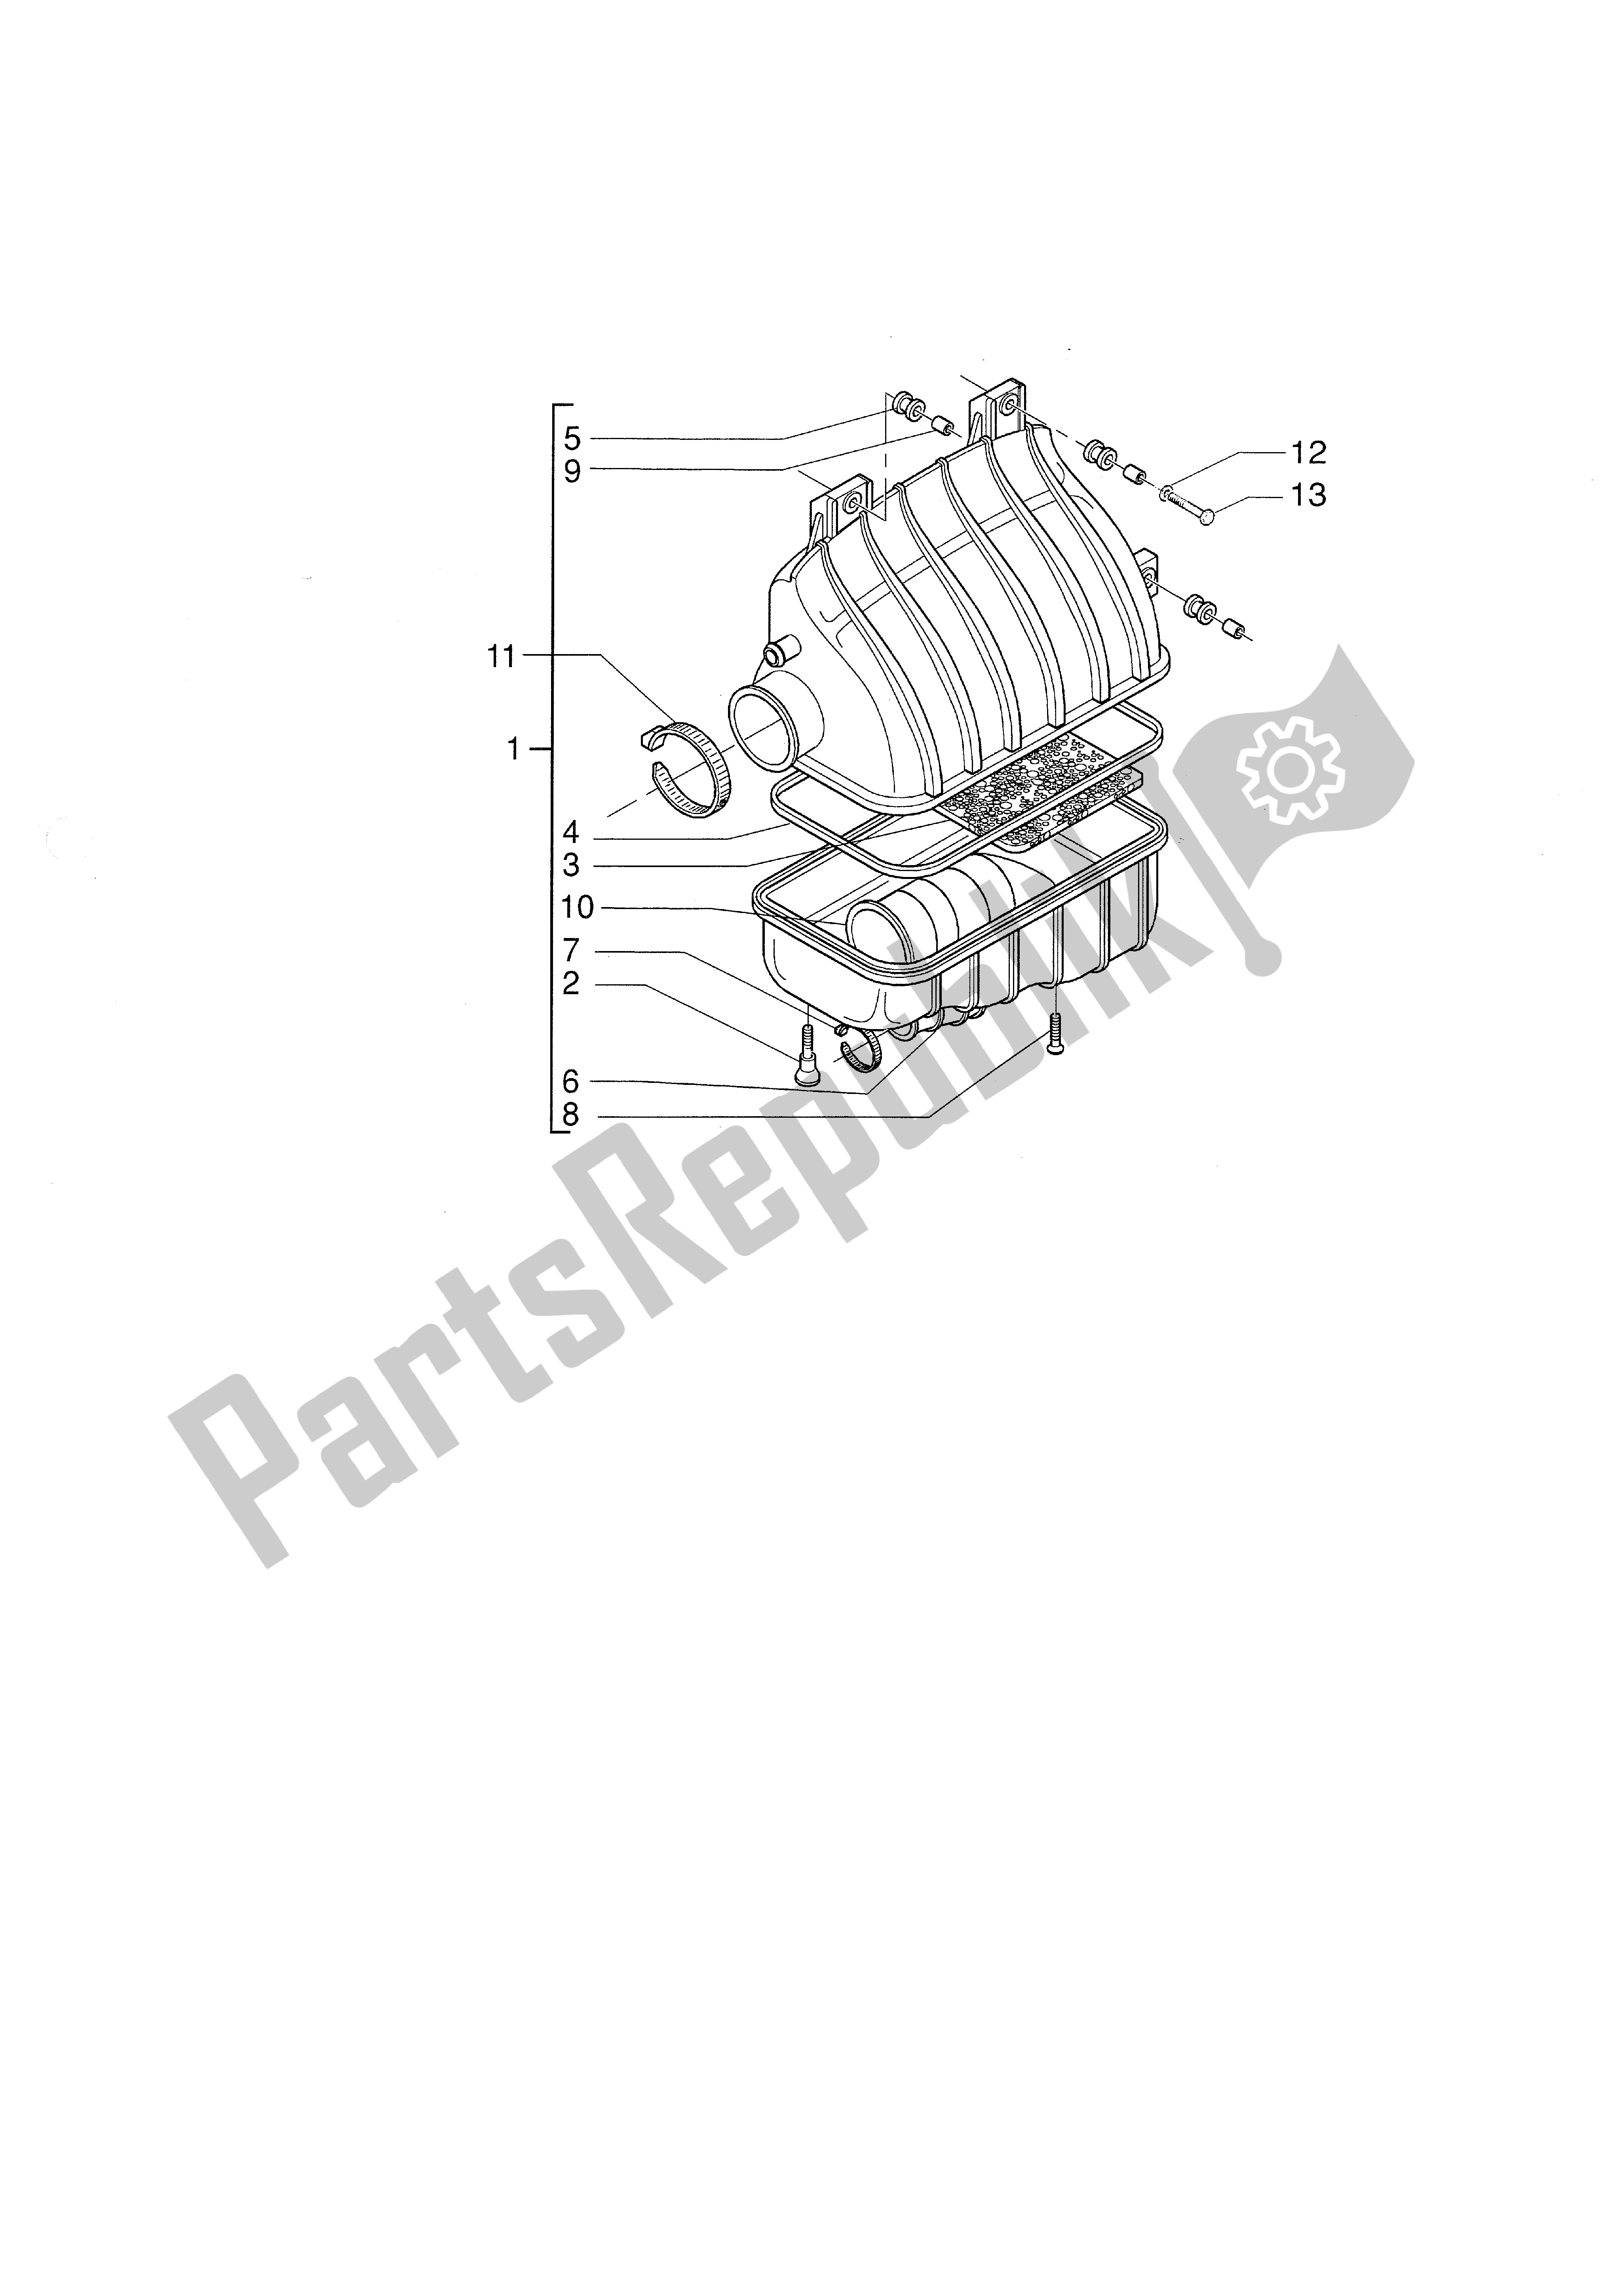 All parts for the Air Filter of the Piaggio X9 500 2001 - 2002